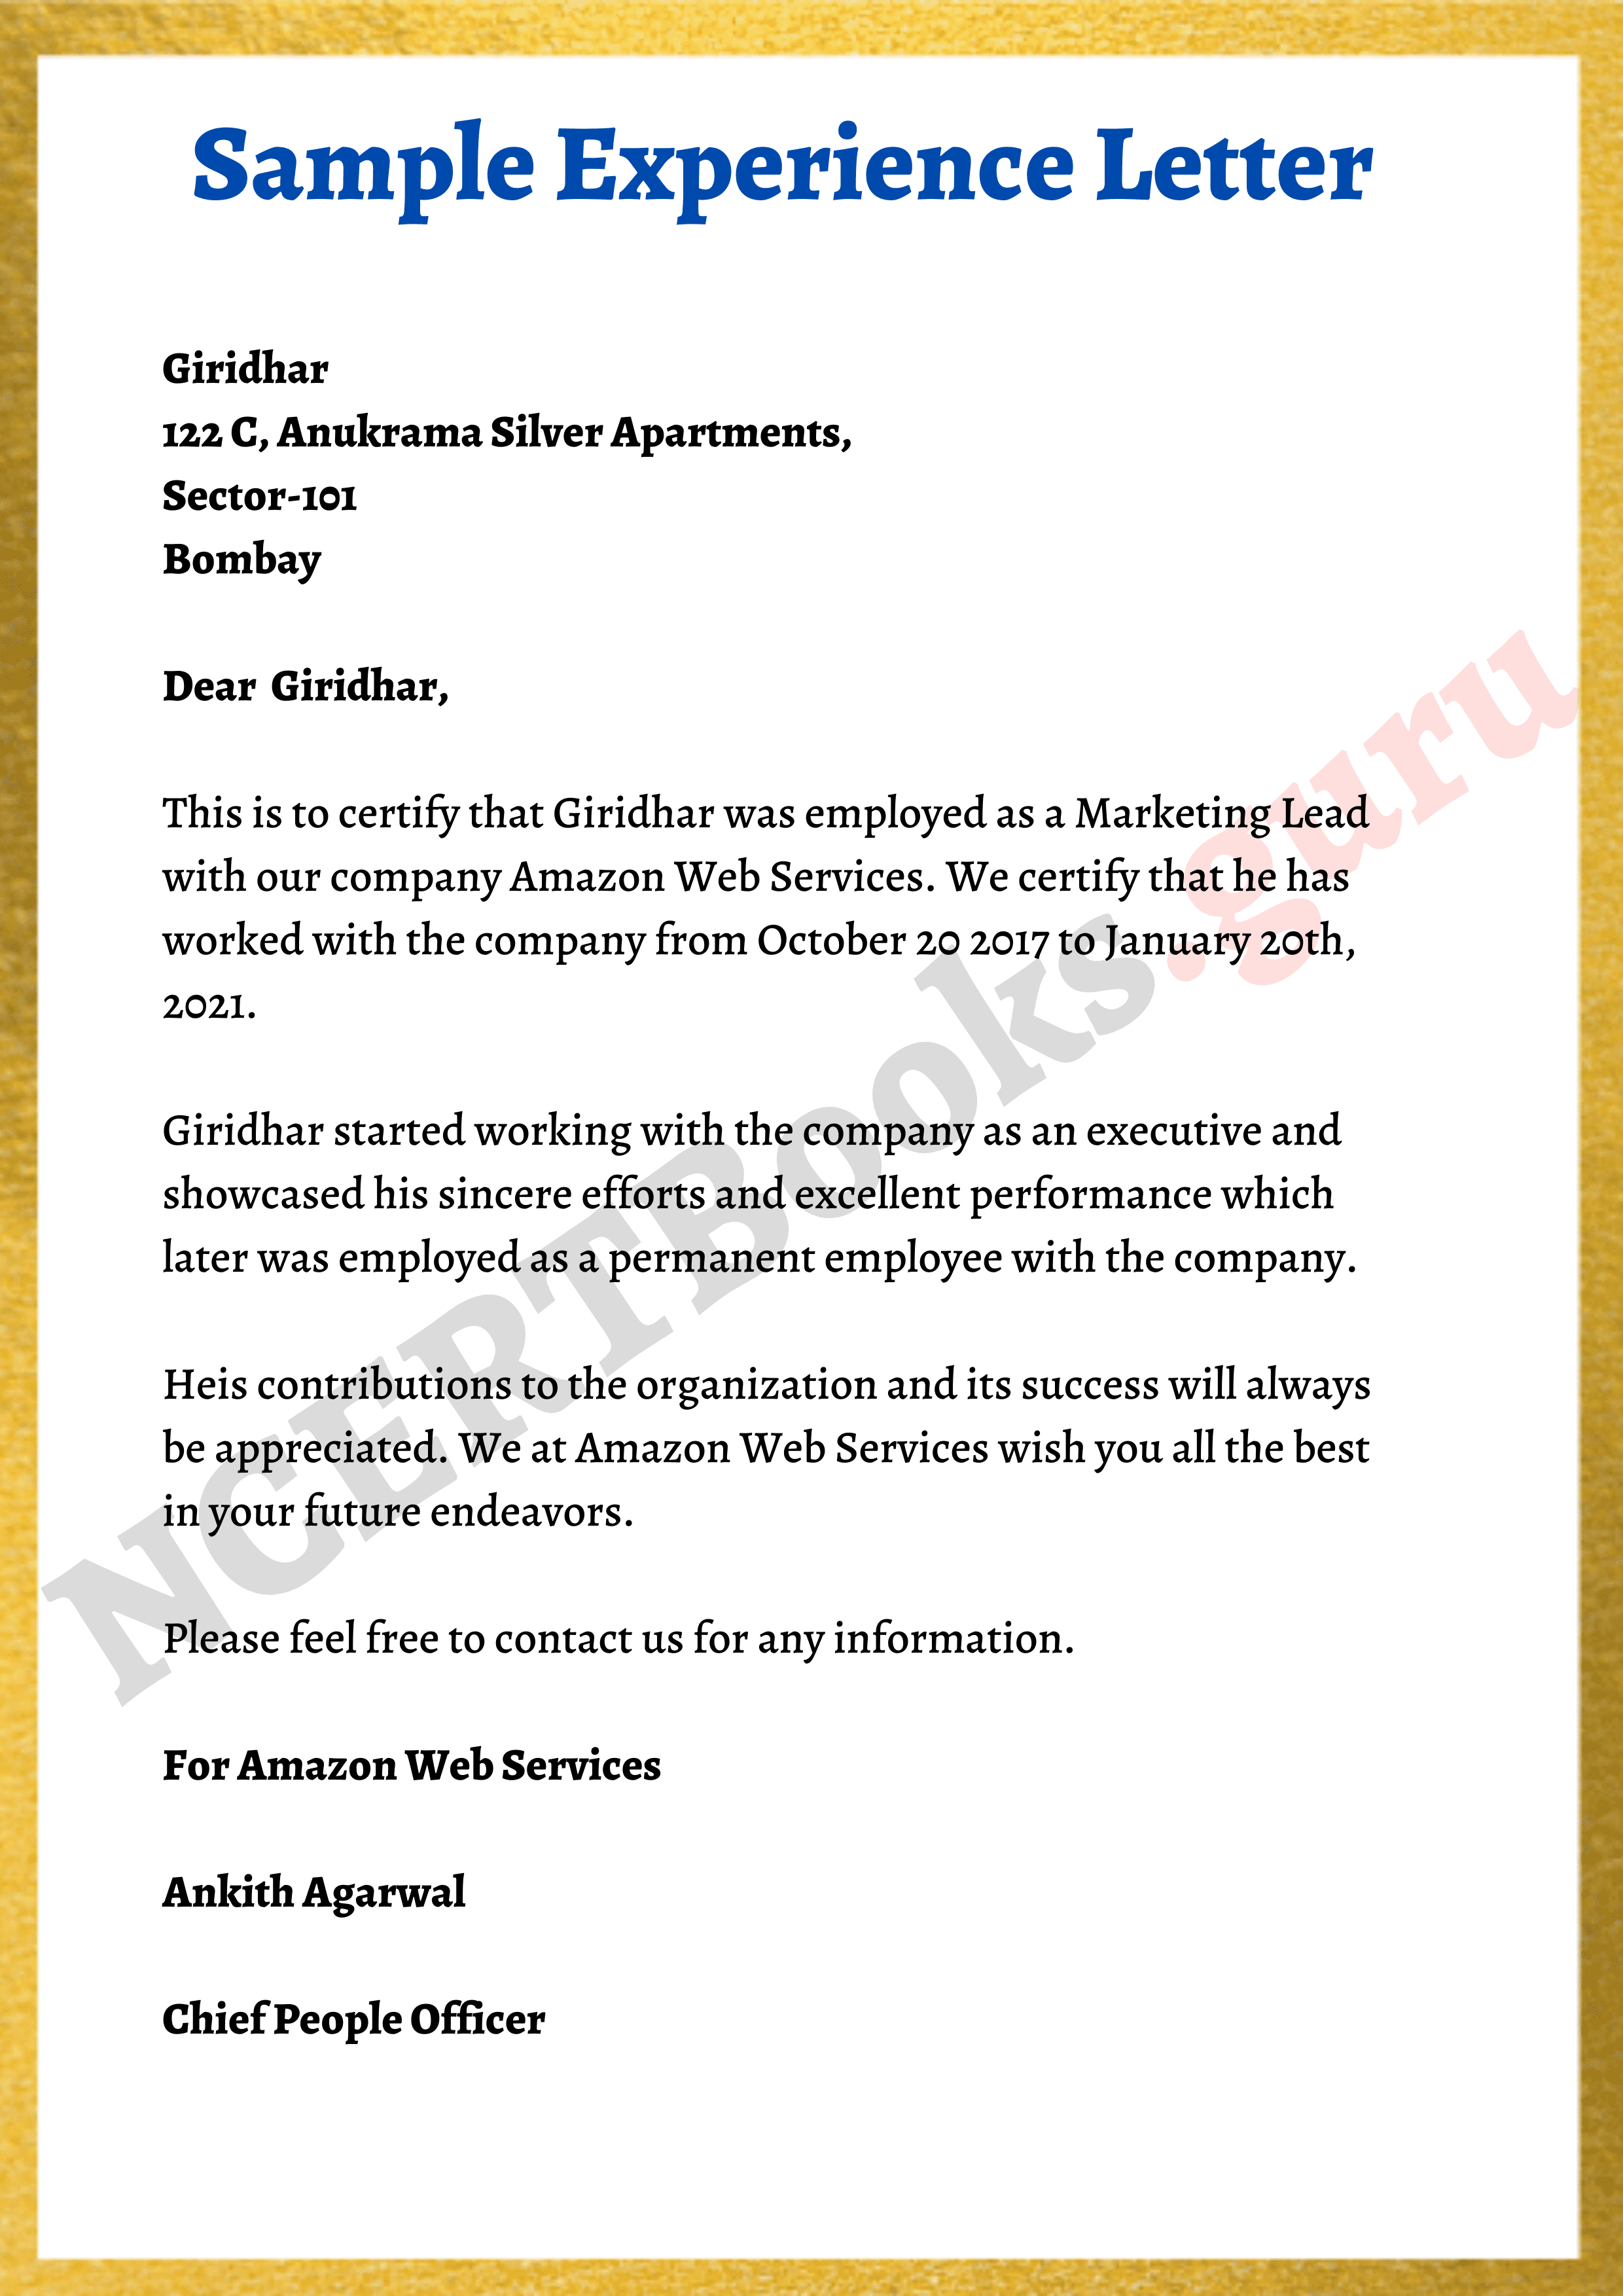 application letter experience sample